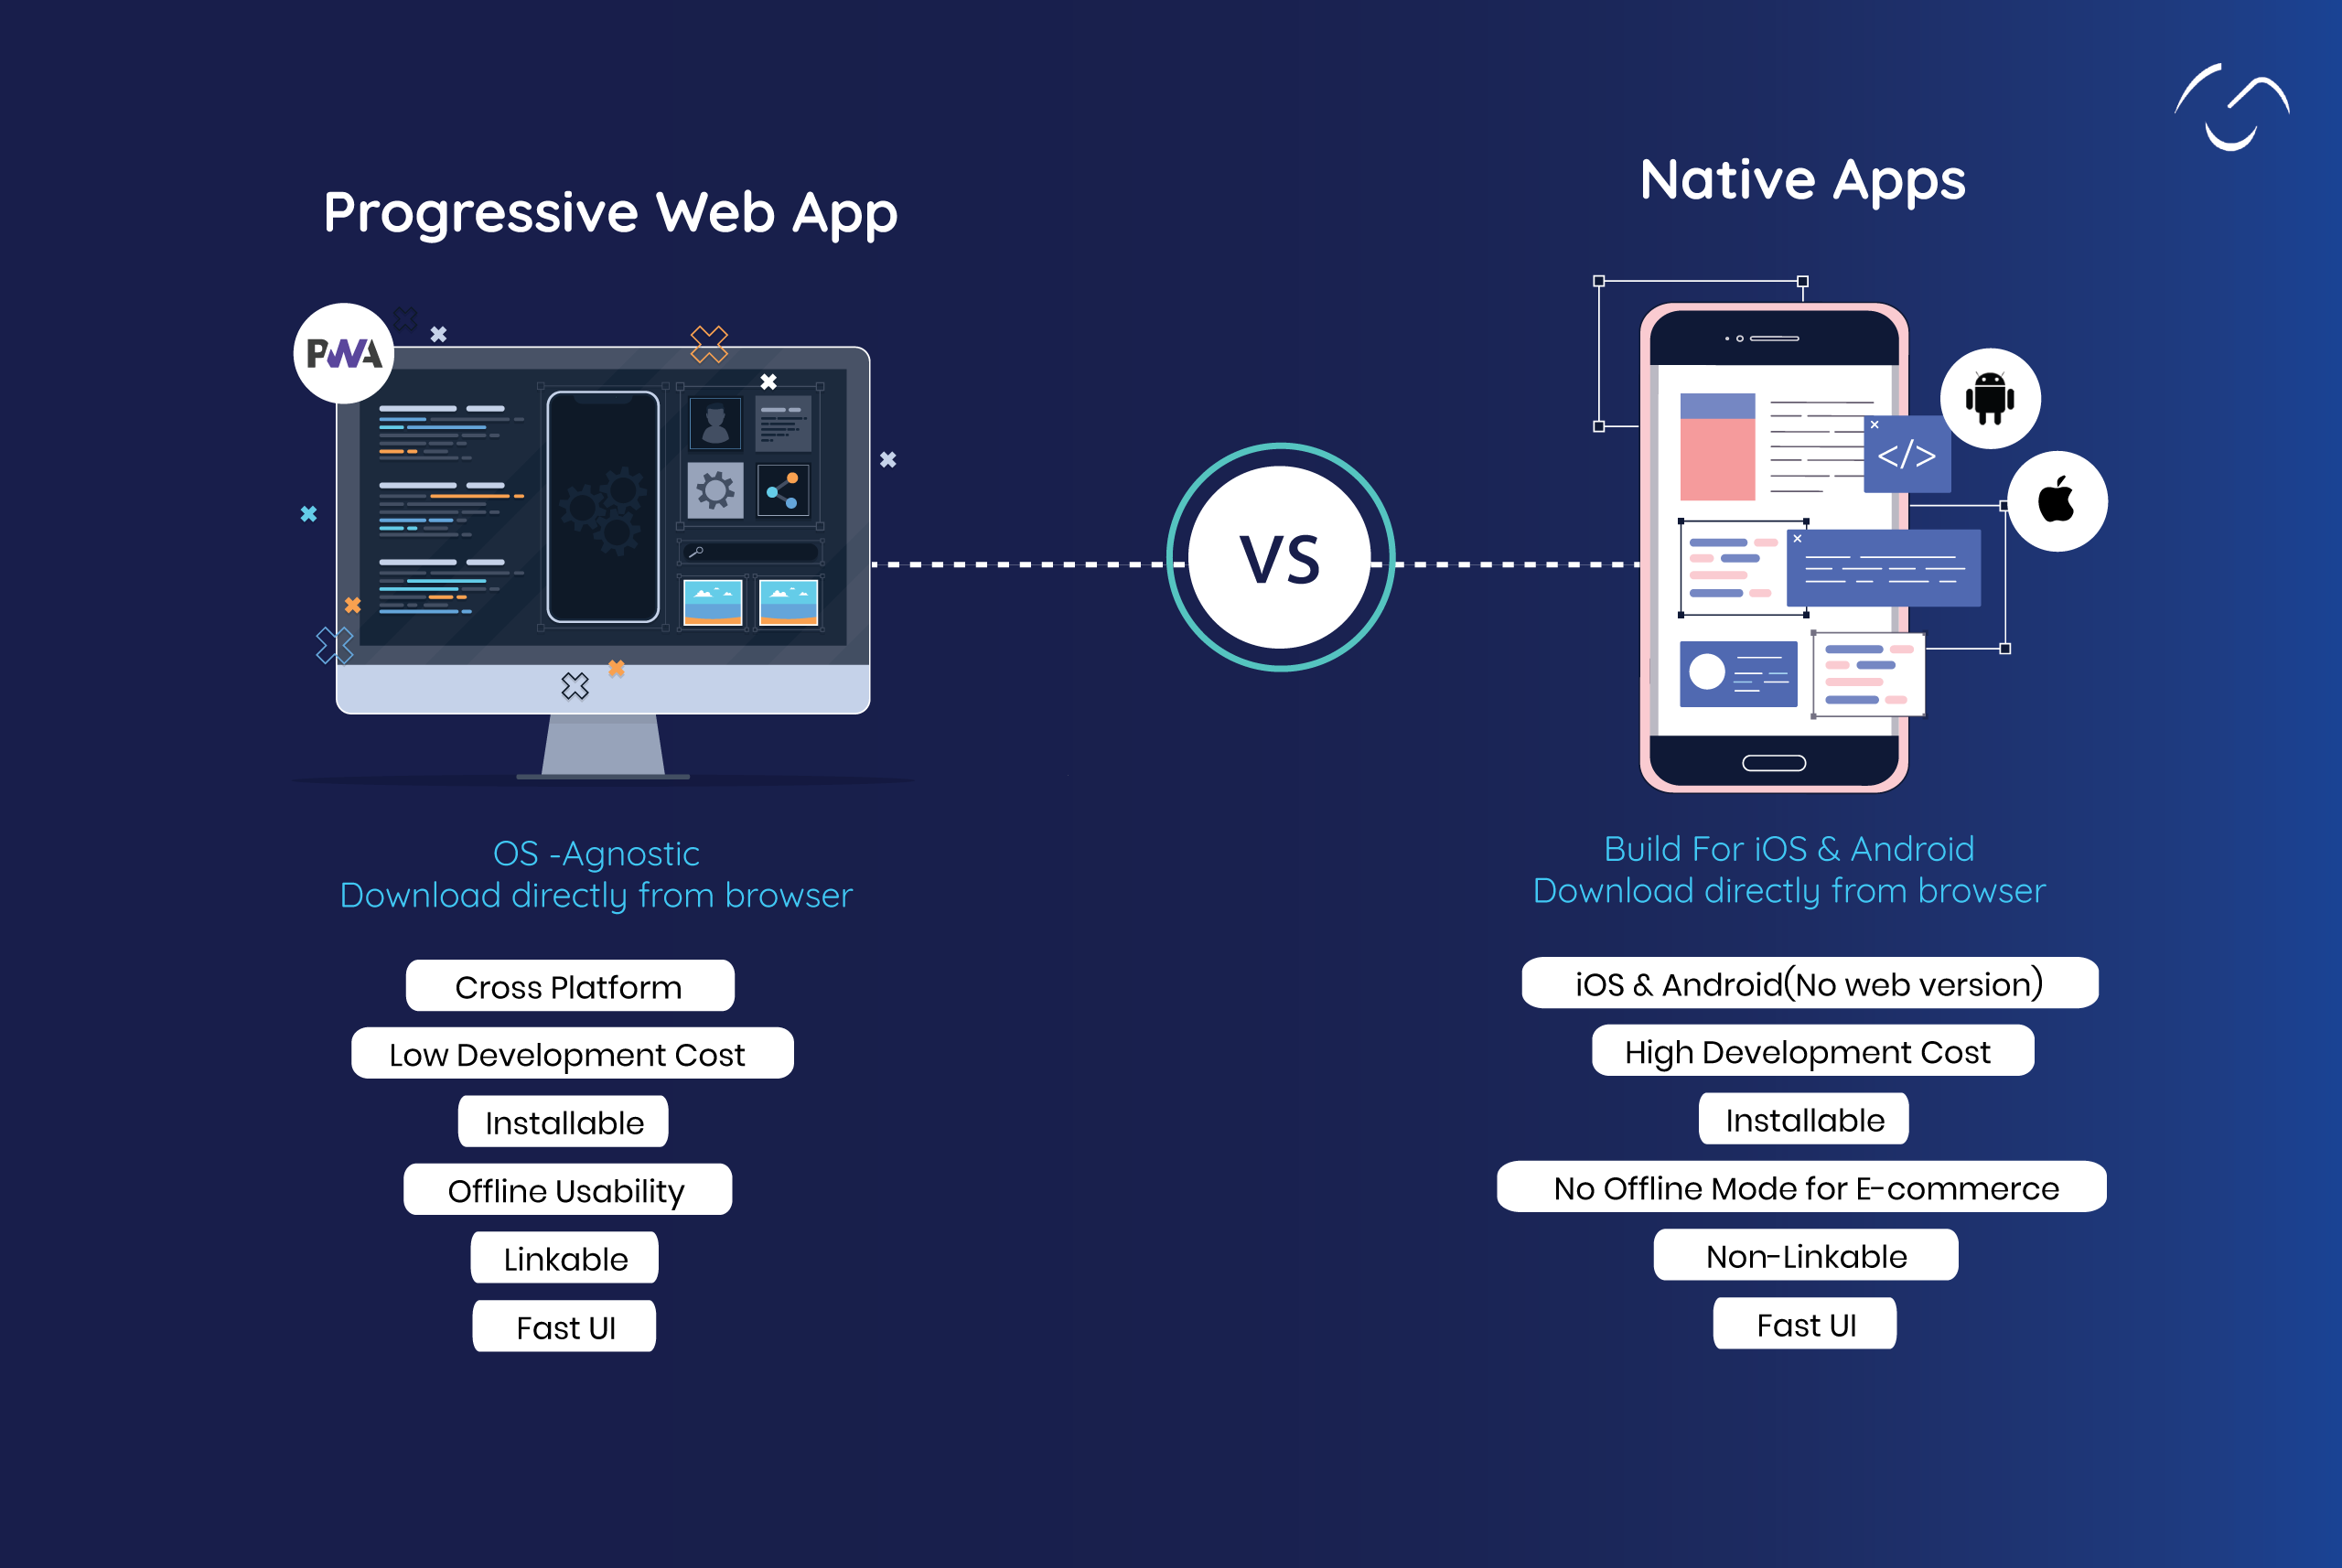 Rise of Progressive Web Apps is different from Native apps